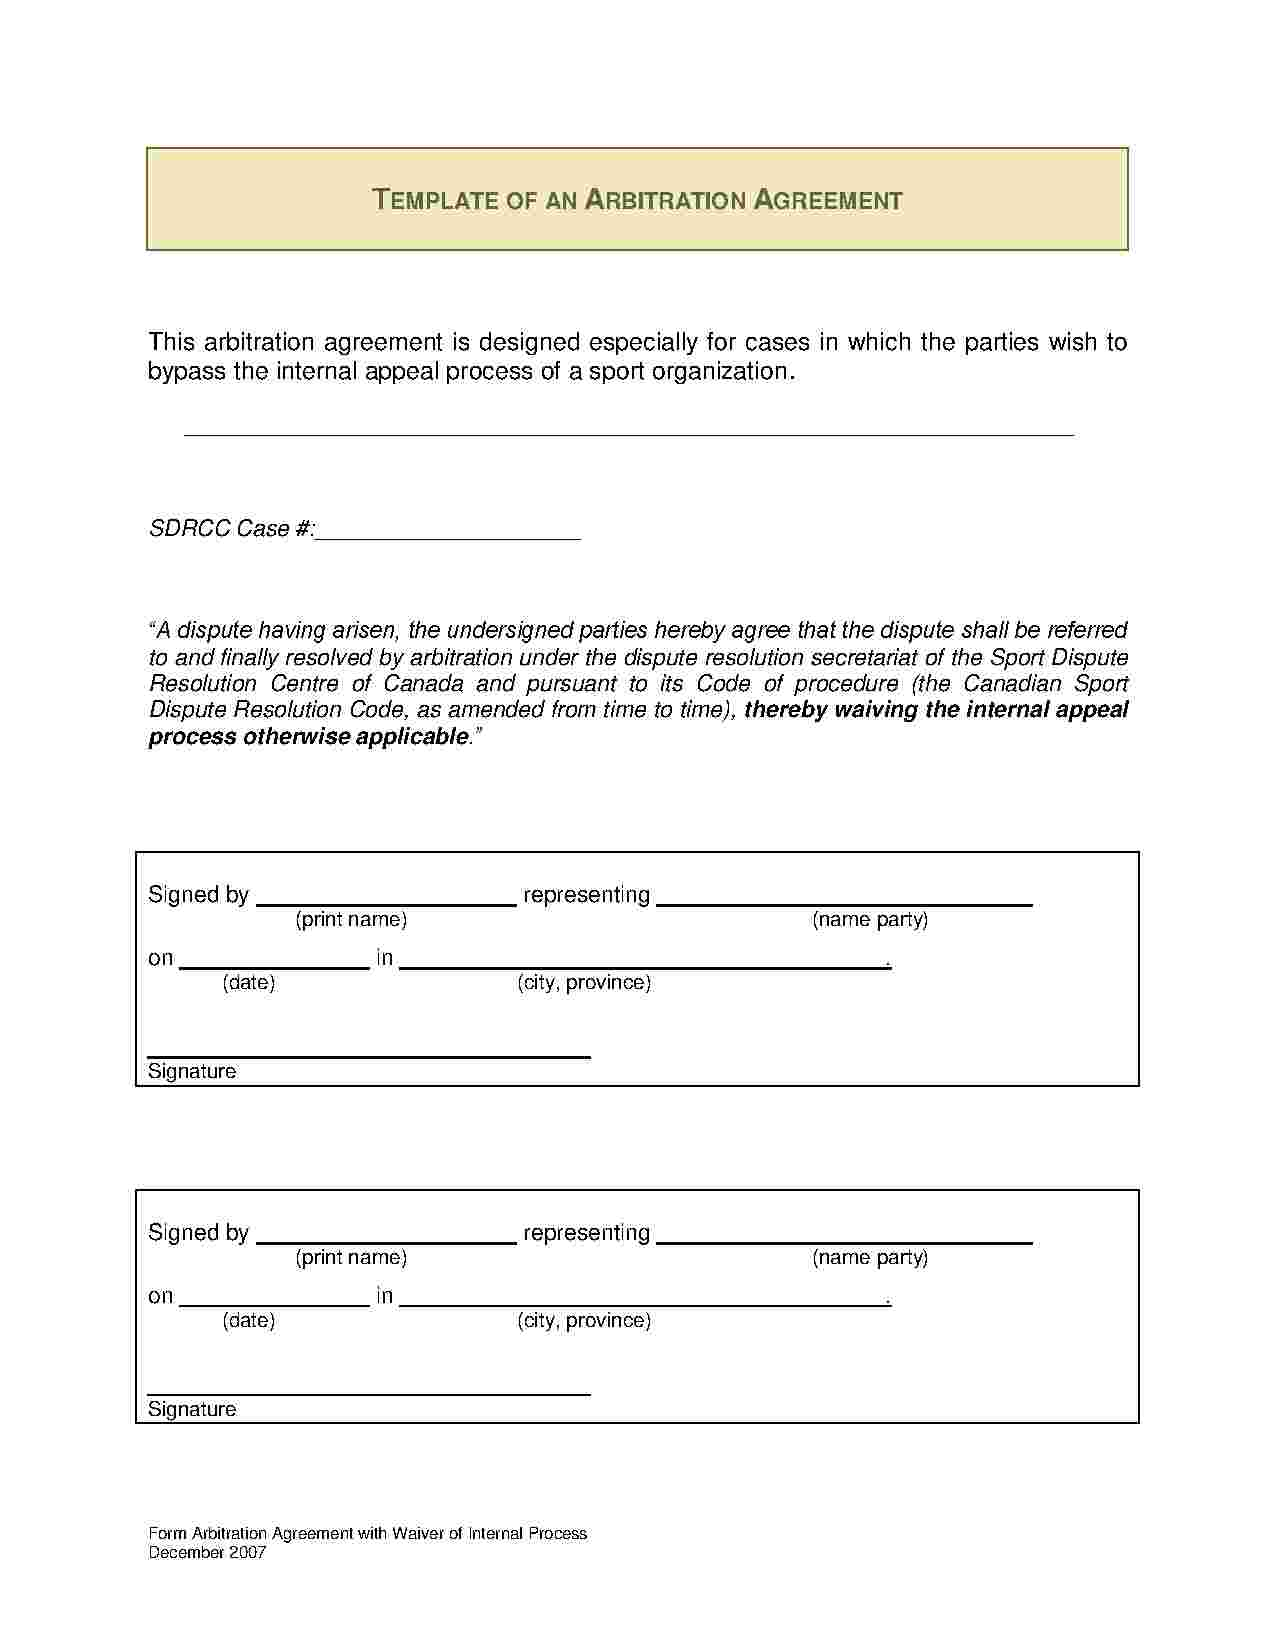 Arbitration Agreement Form Download Arbitration Agreement Style 16 Template For Free At